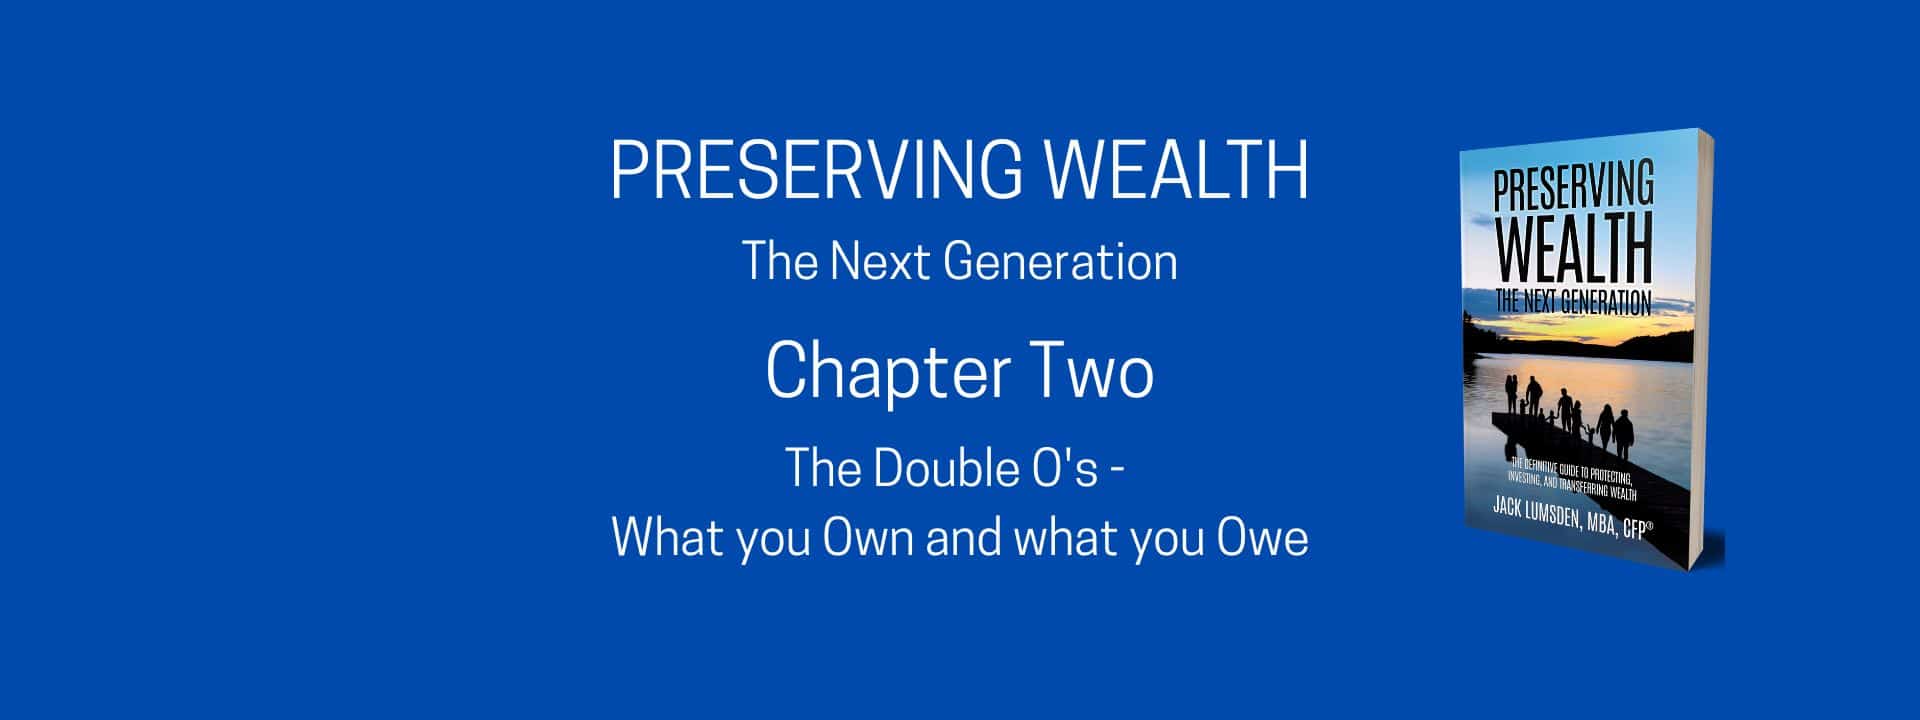 Chapter Two of Preserving Wealth